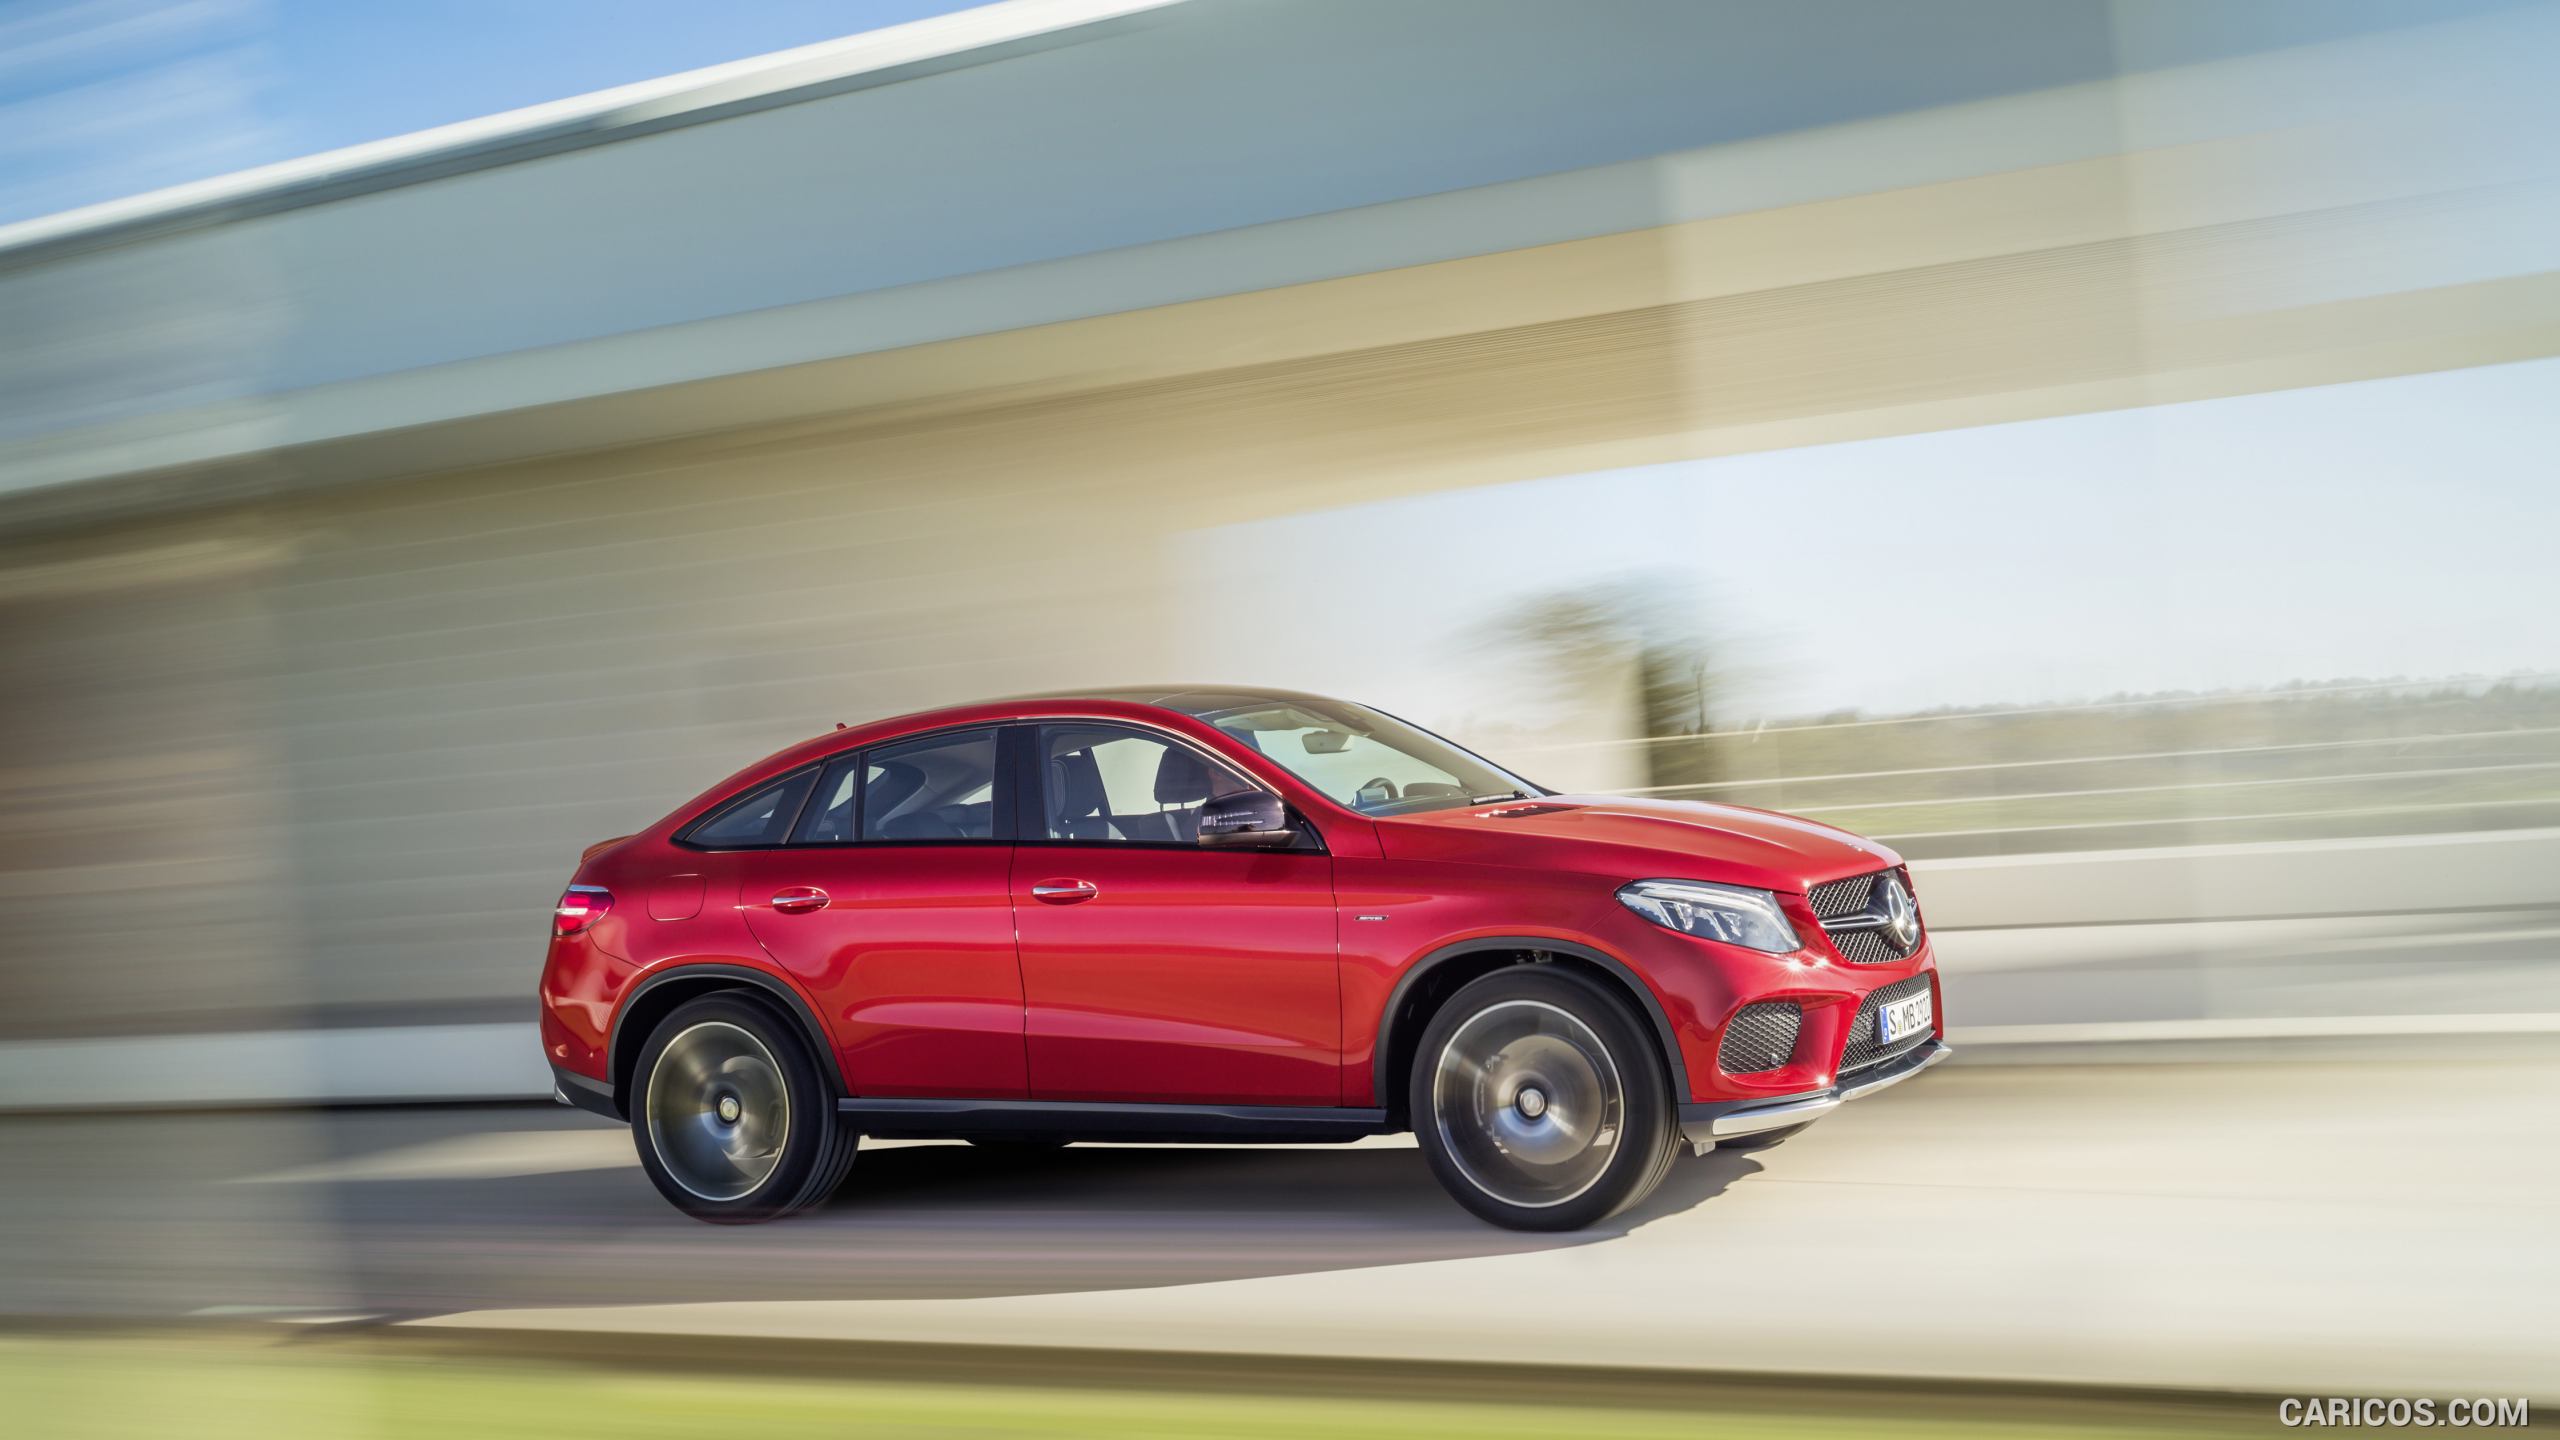 2016 Mercedes-Benz GLE 450 AMG Coupe 4MATIC (Designo Hyacinth Red Metallic) - Side, #10 of 115